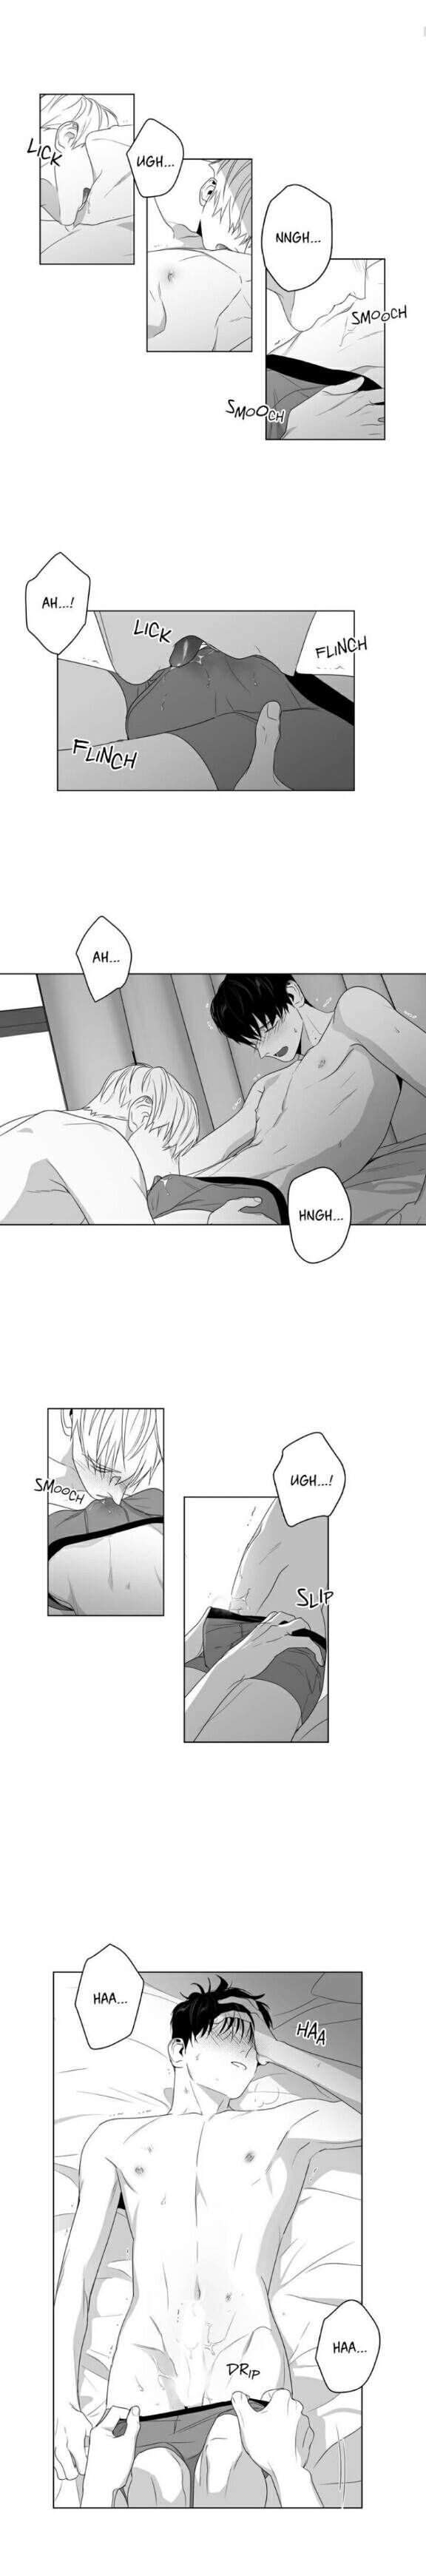 Lover Boy (Lezhin) Chapter 070 page 3